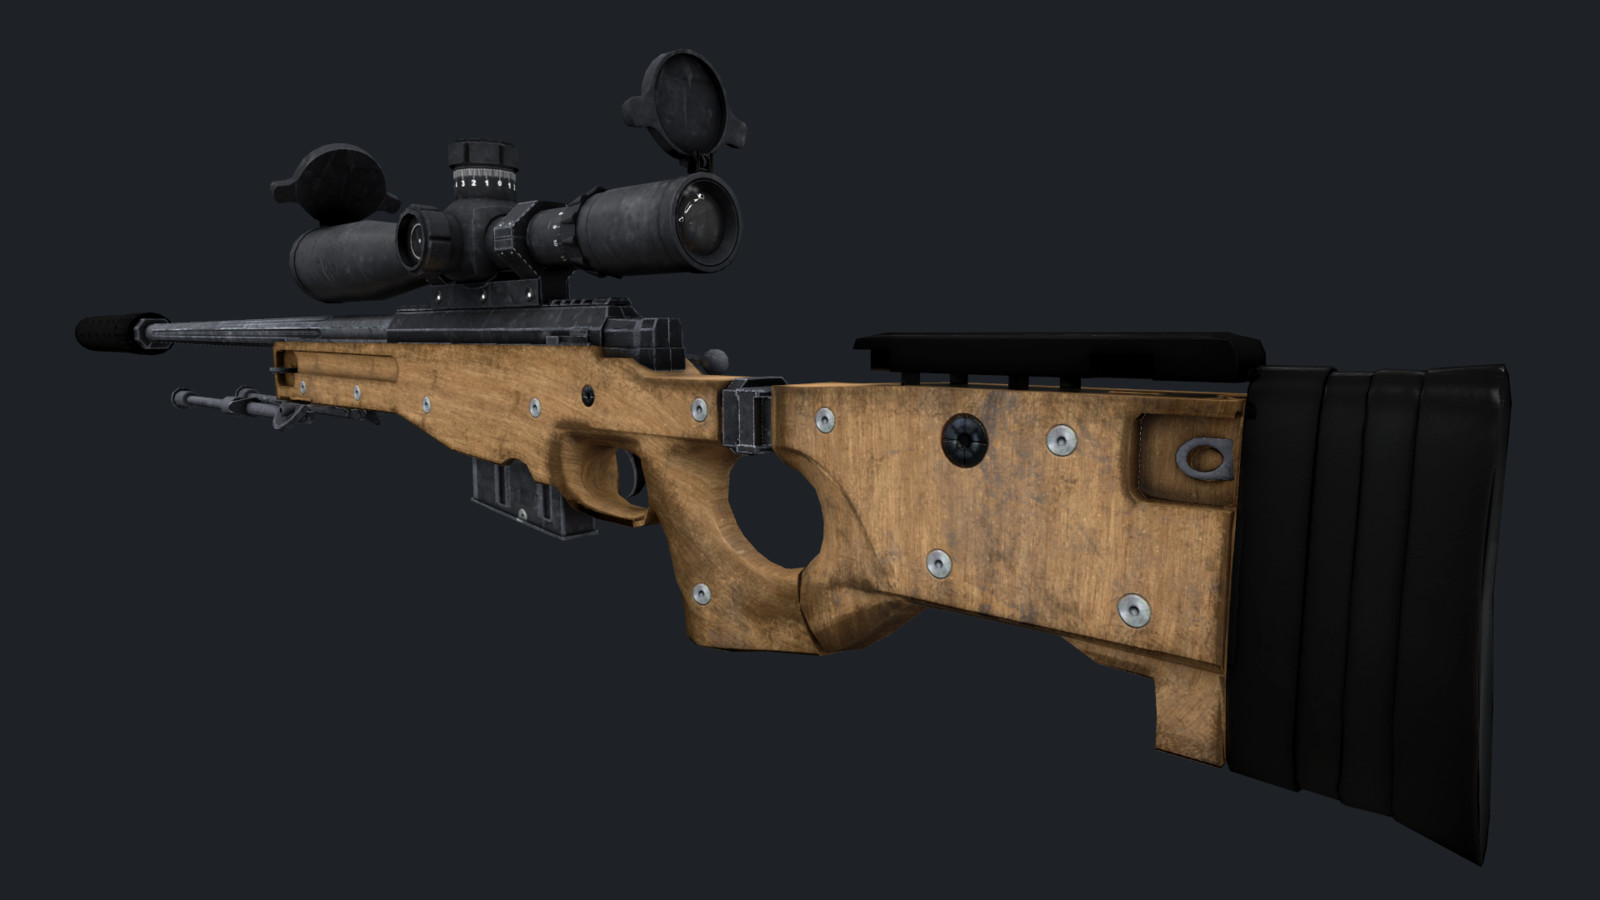 Awp cannons kg tr фото 39